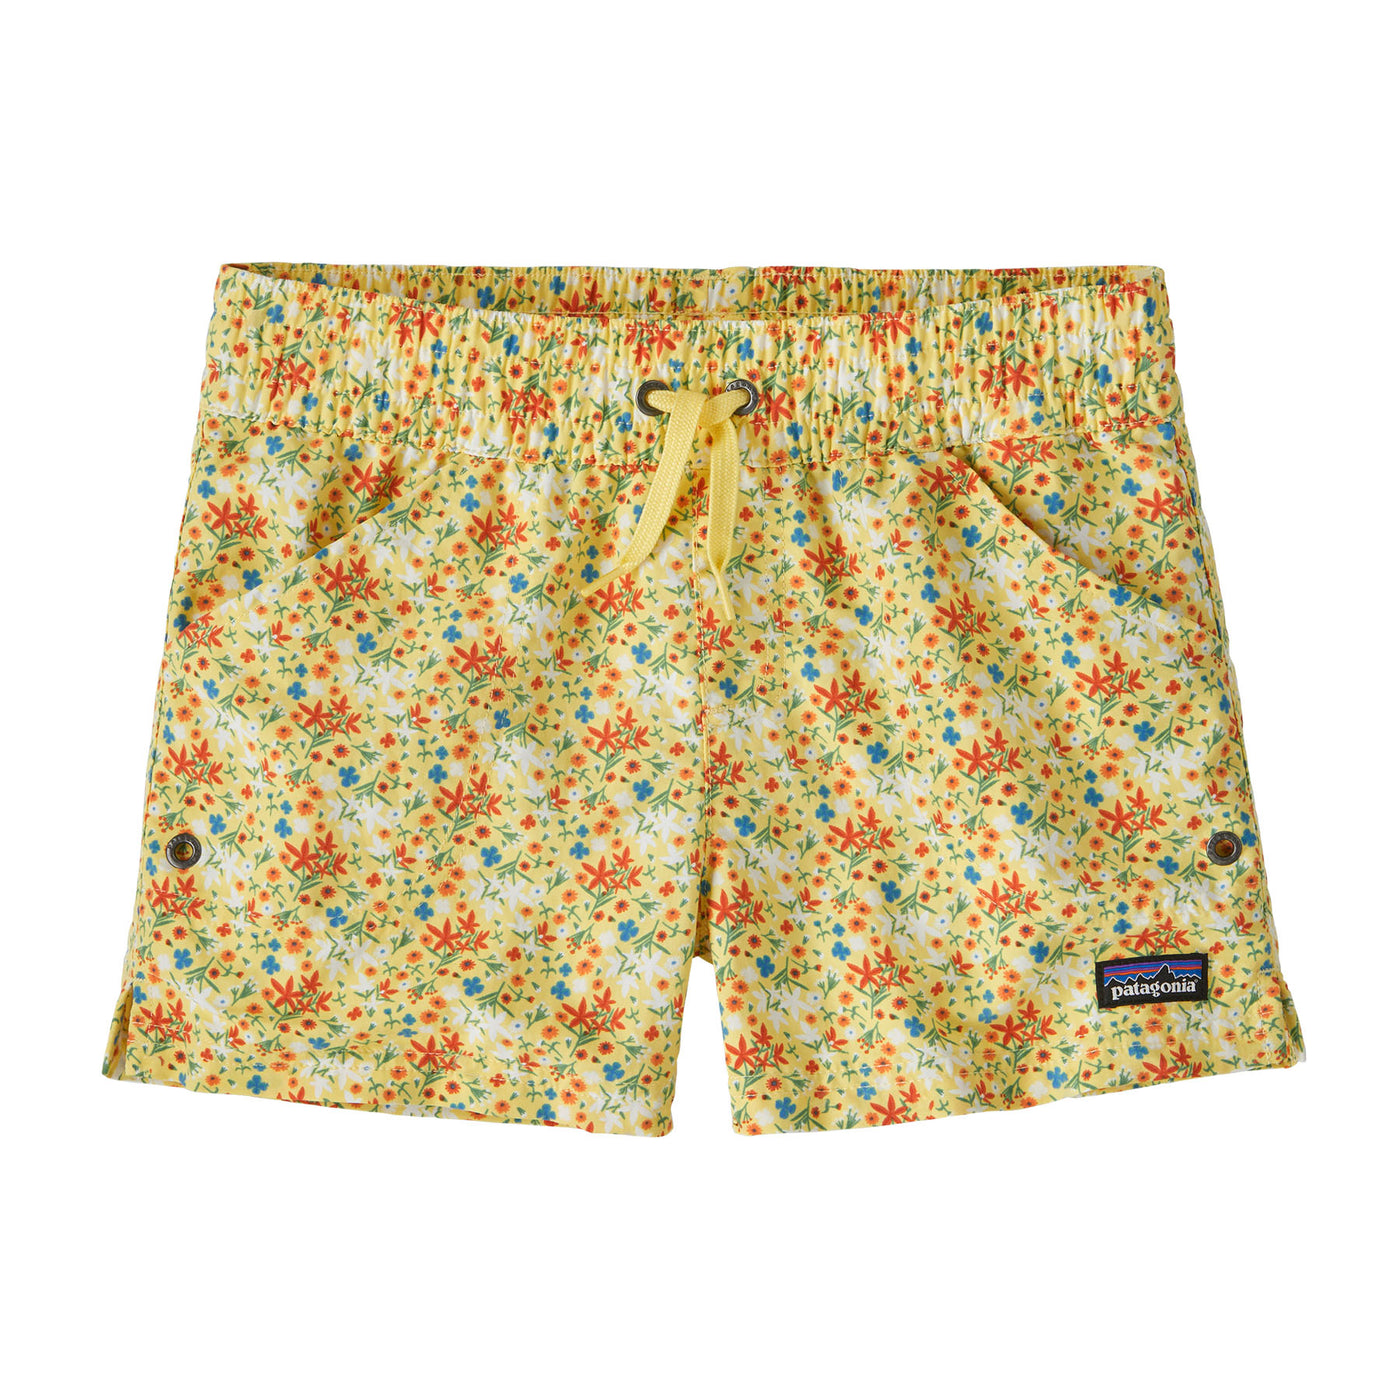 PATAGONIA Kids' Costa Rica Baggies Shorts 3in - Unlined Little Isla Milled Yellow LIMD